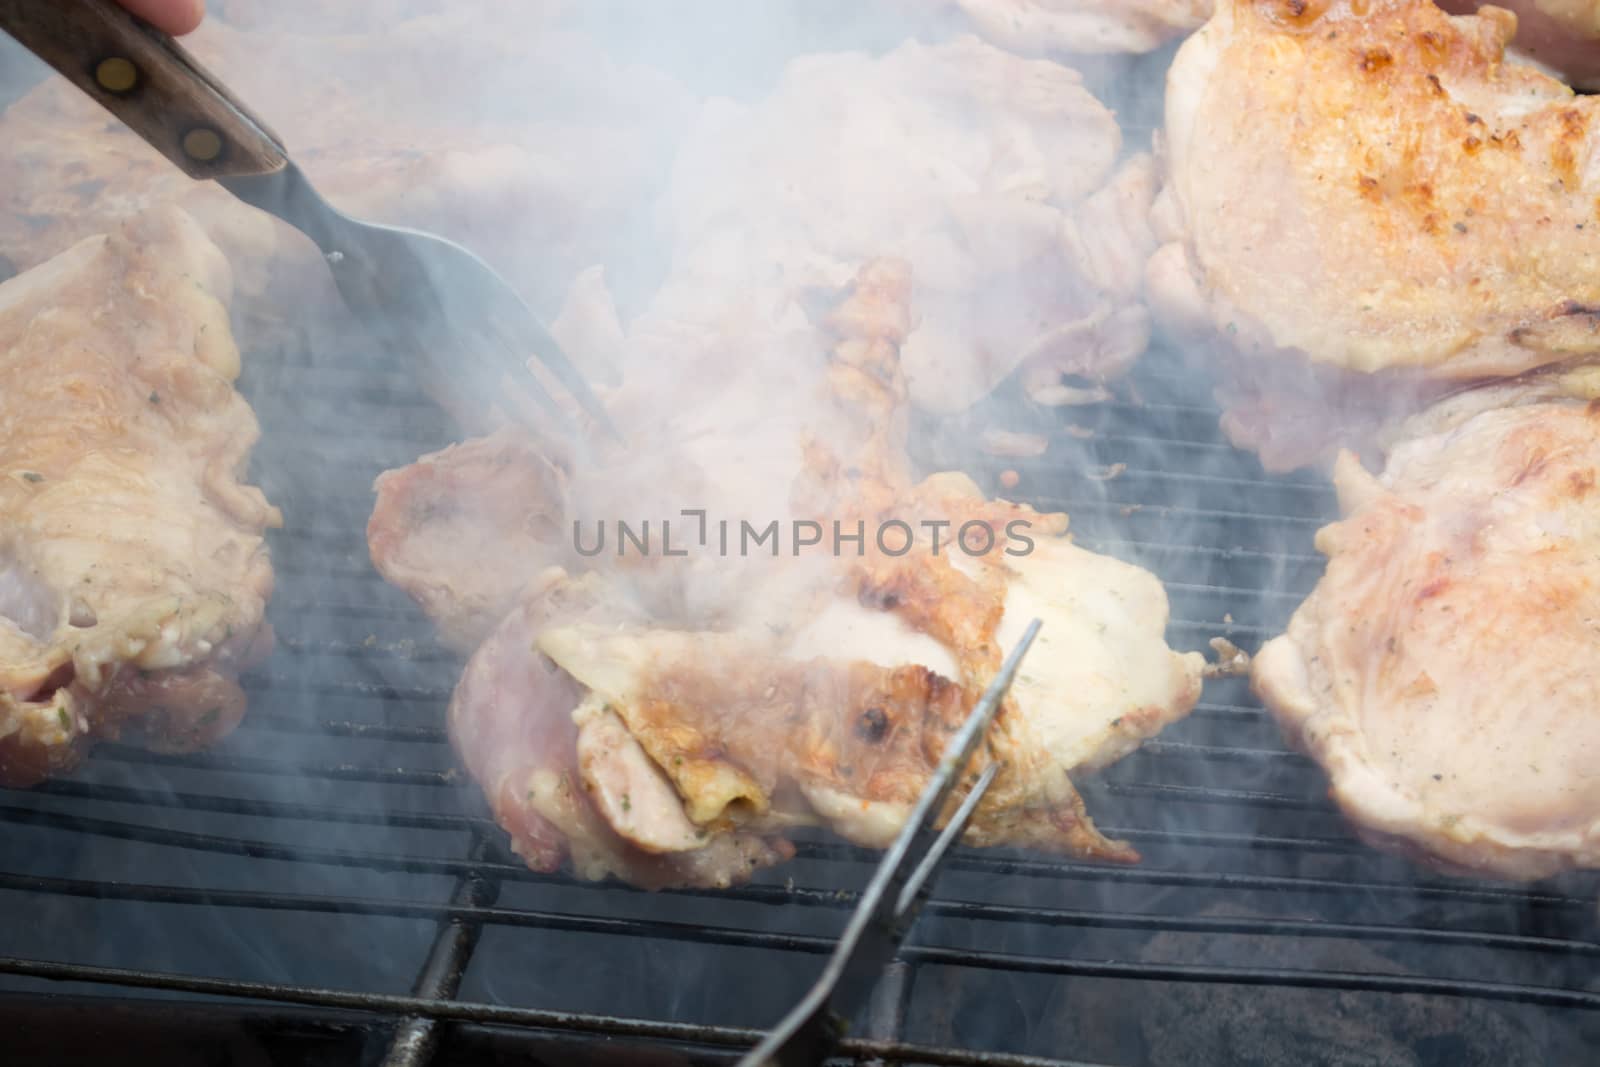 Turning over raw pork chops on grill. Smoke rising from heated grill